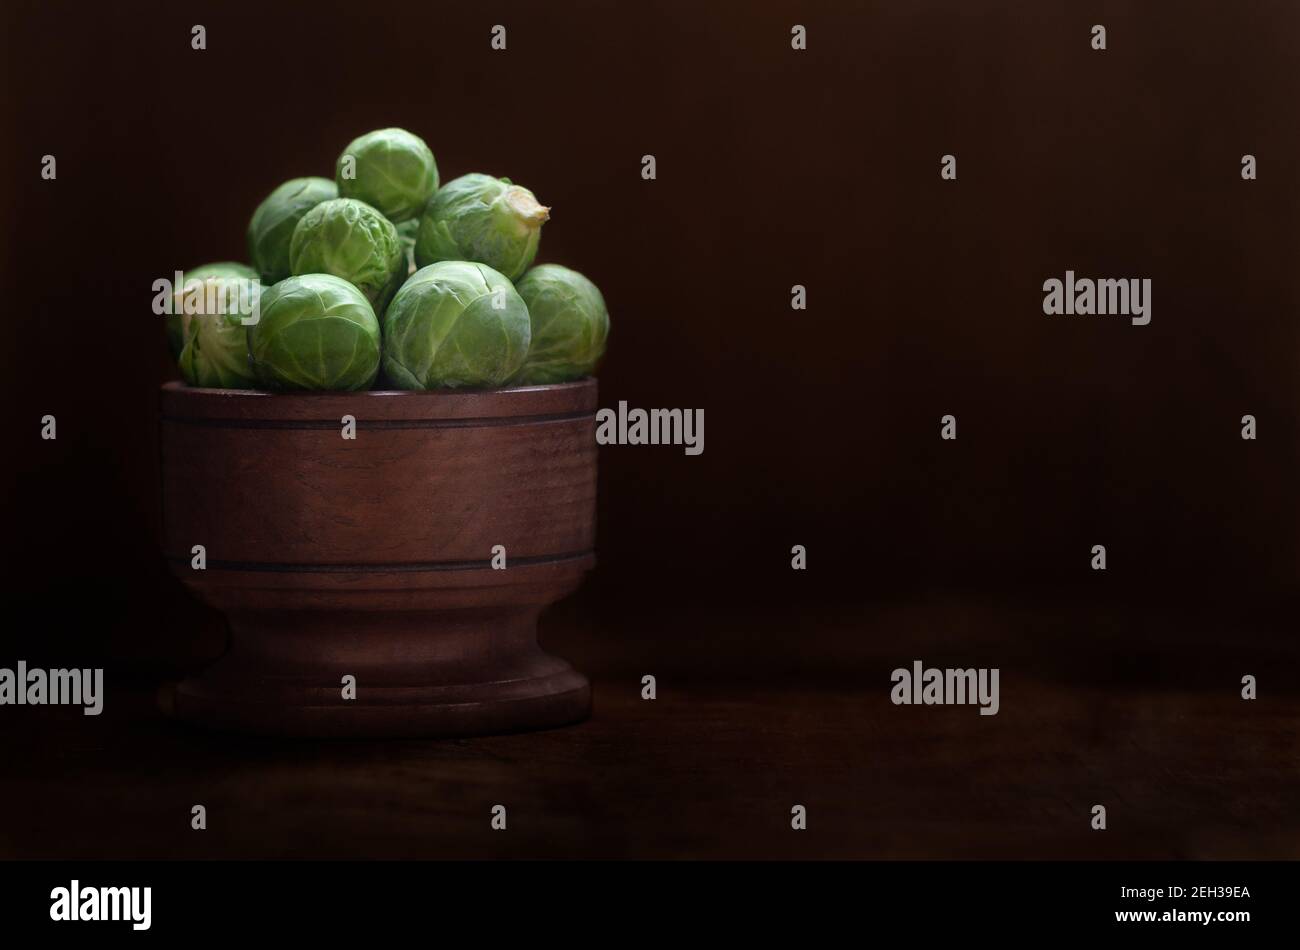 Brussels sprouts in a wooden bowl. Stock Photo